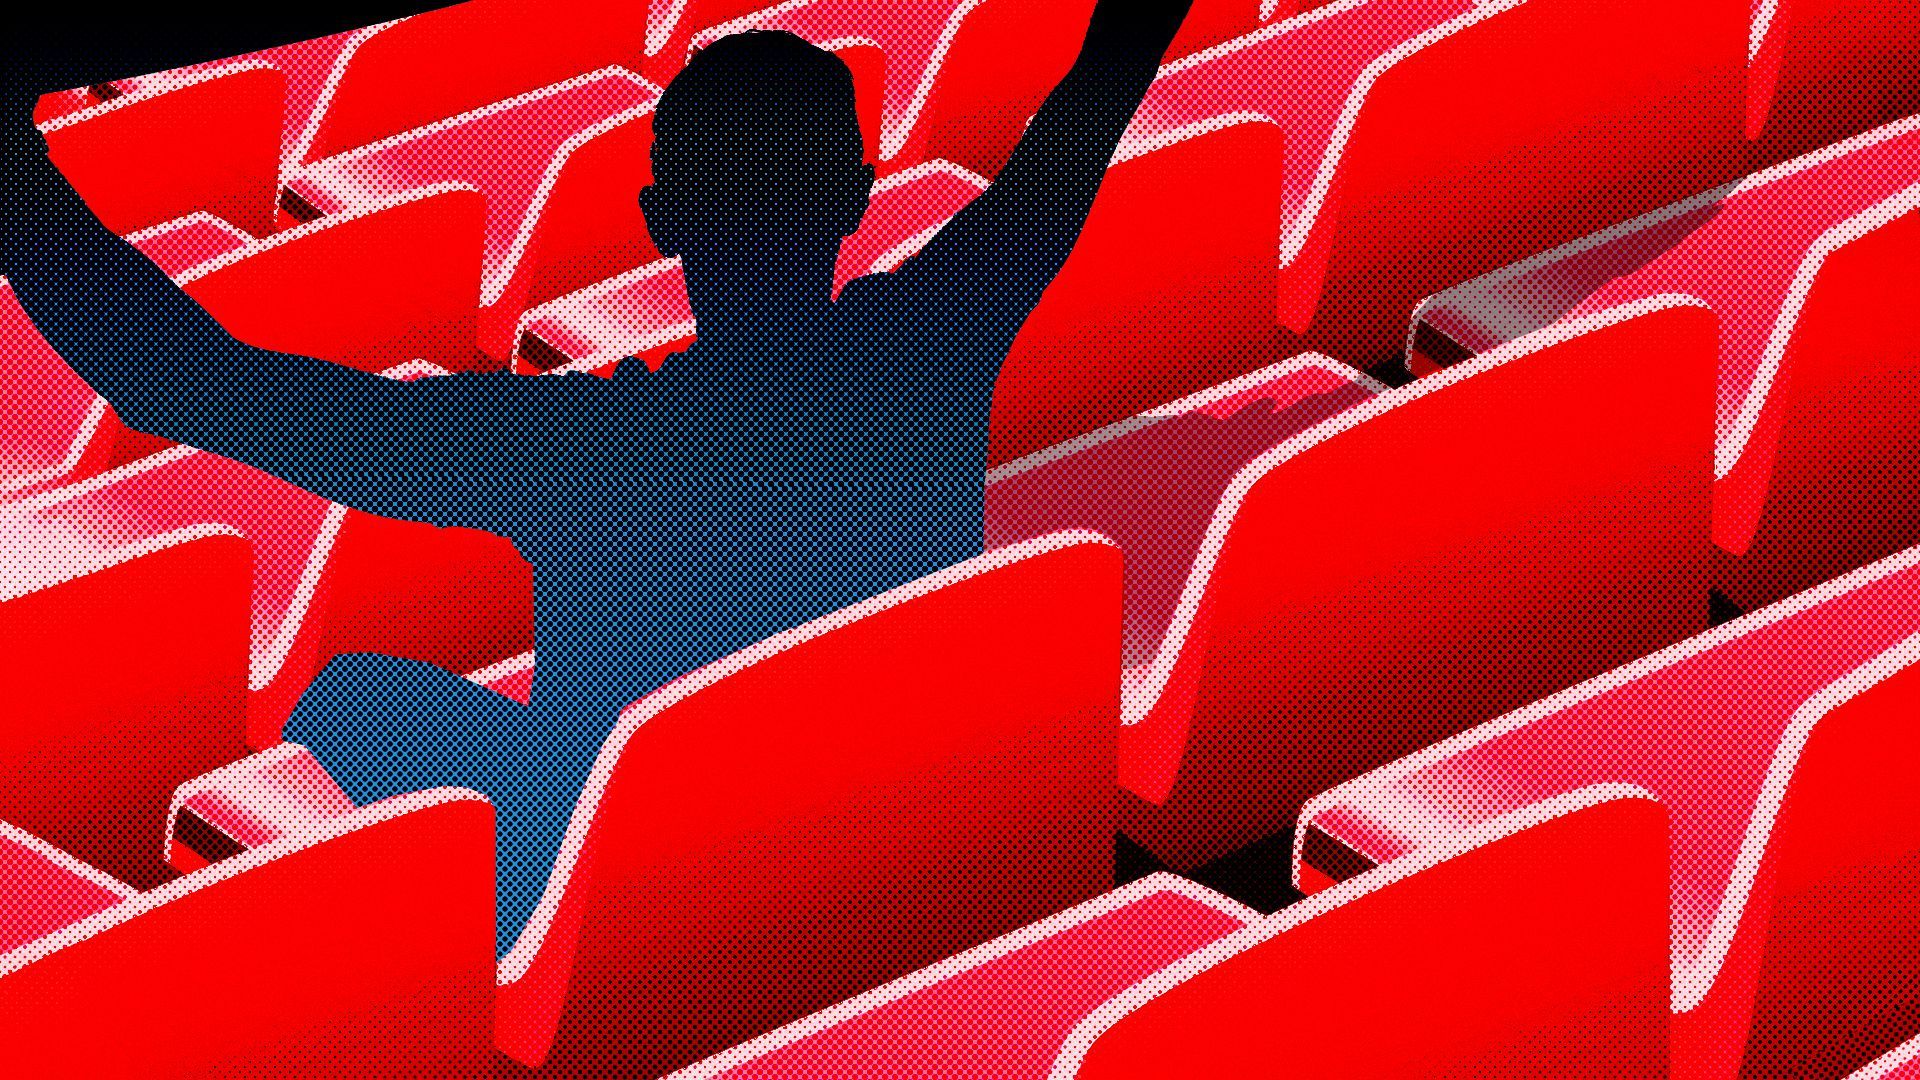 Illustration of an empty stadium filled only by the silhouette of an absent spectator